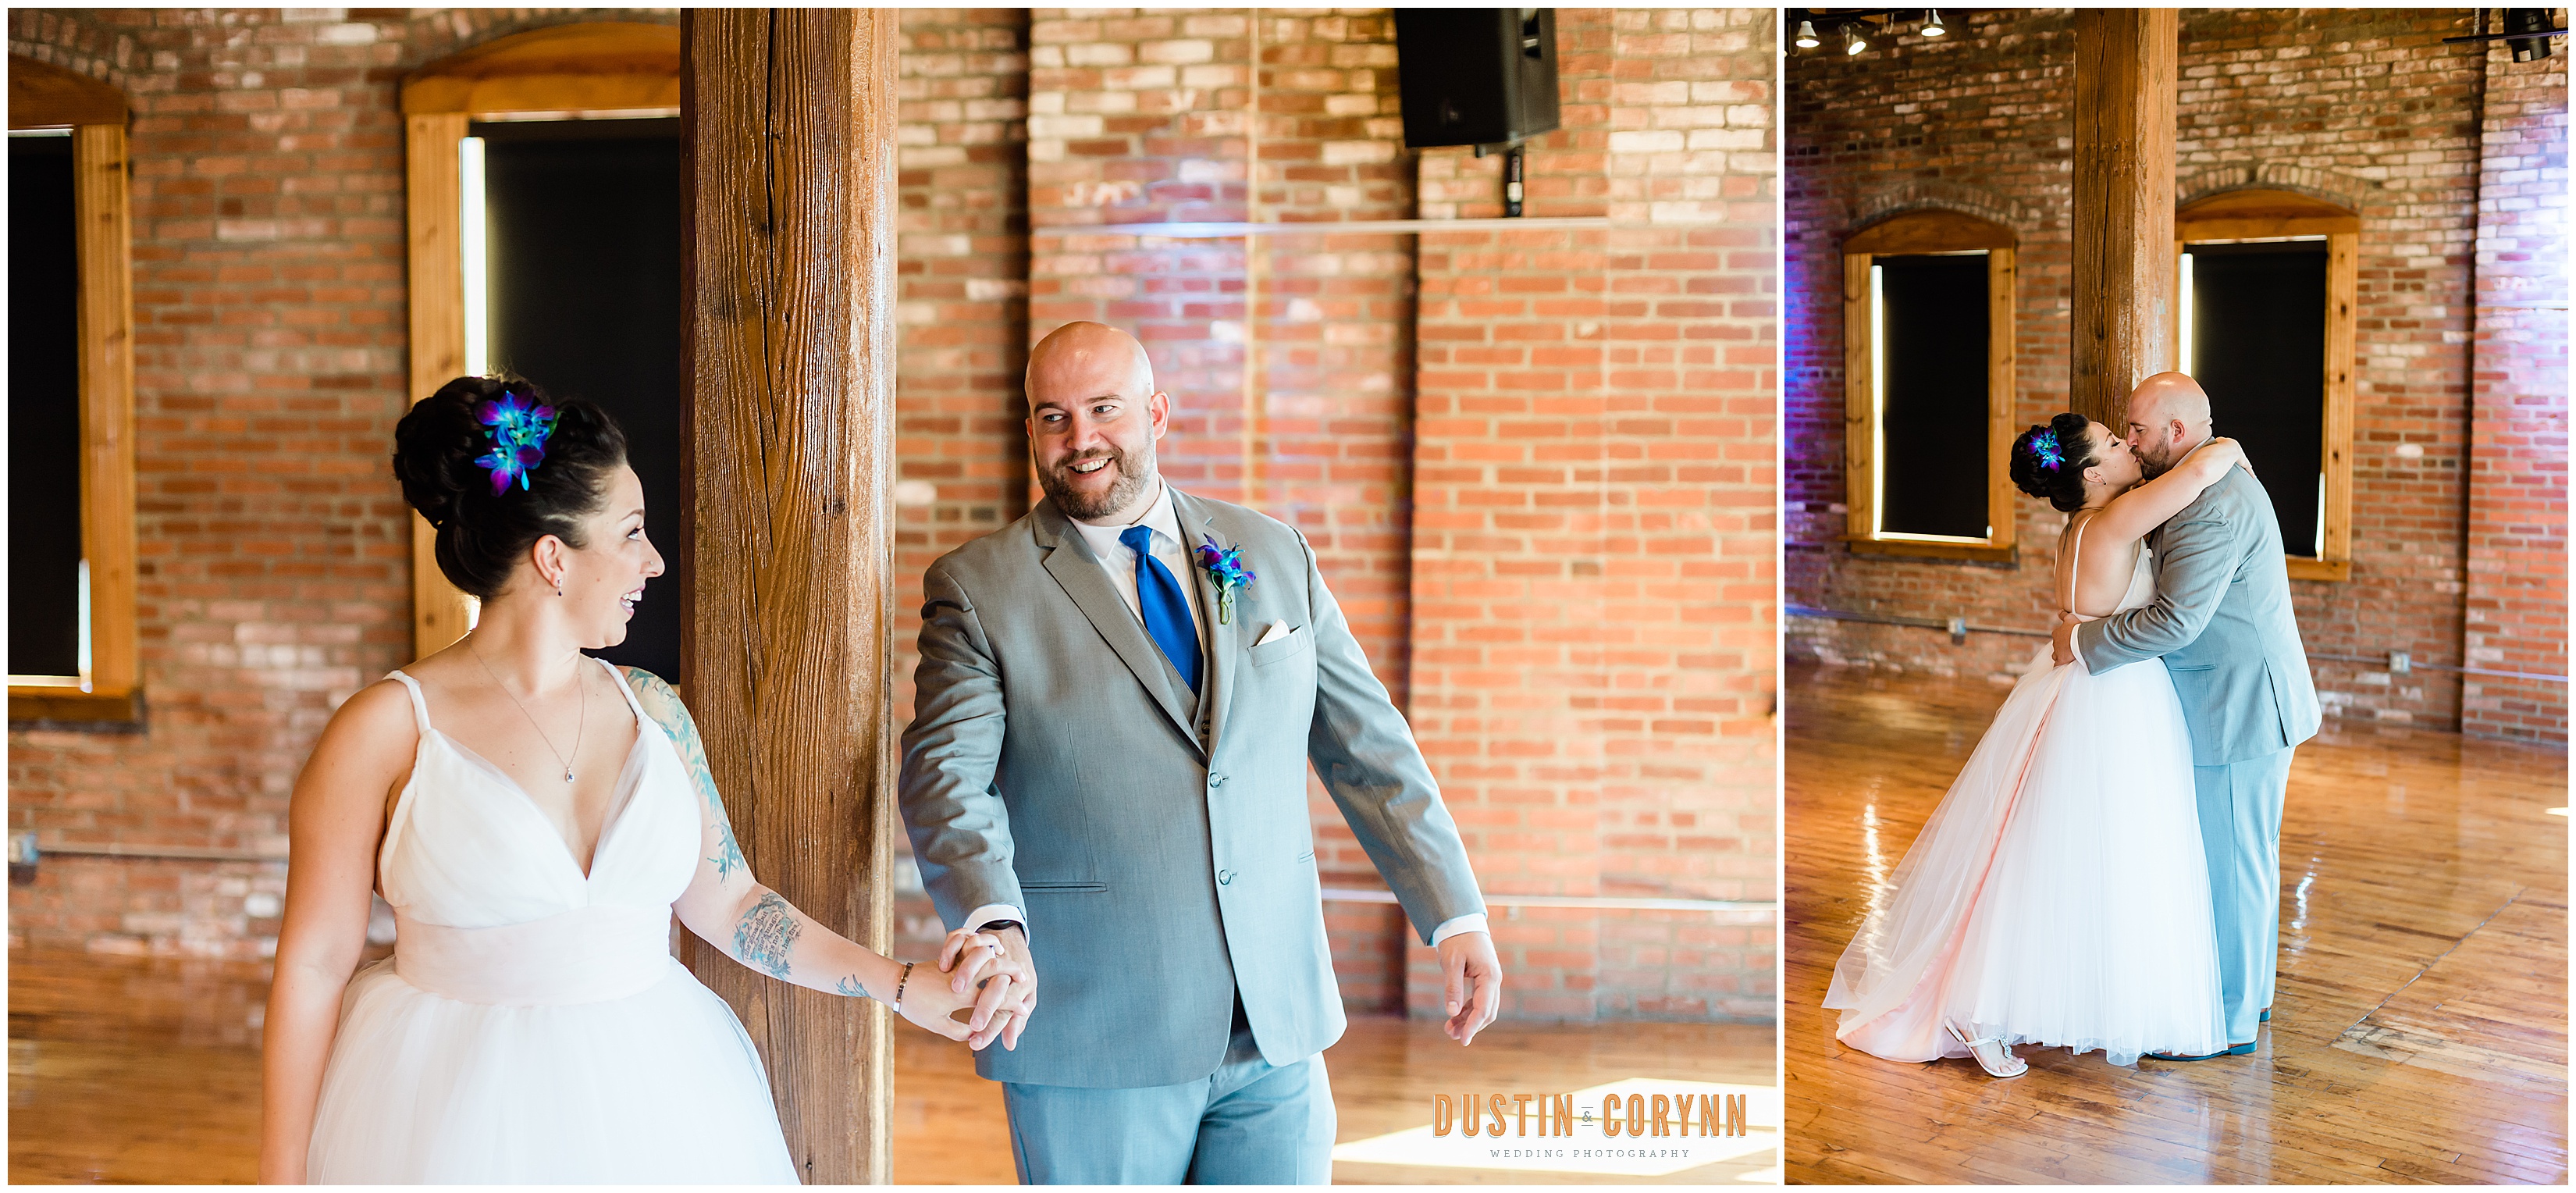 First Look at the Mavris Arts Center Wedding